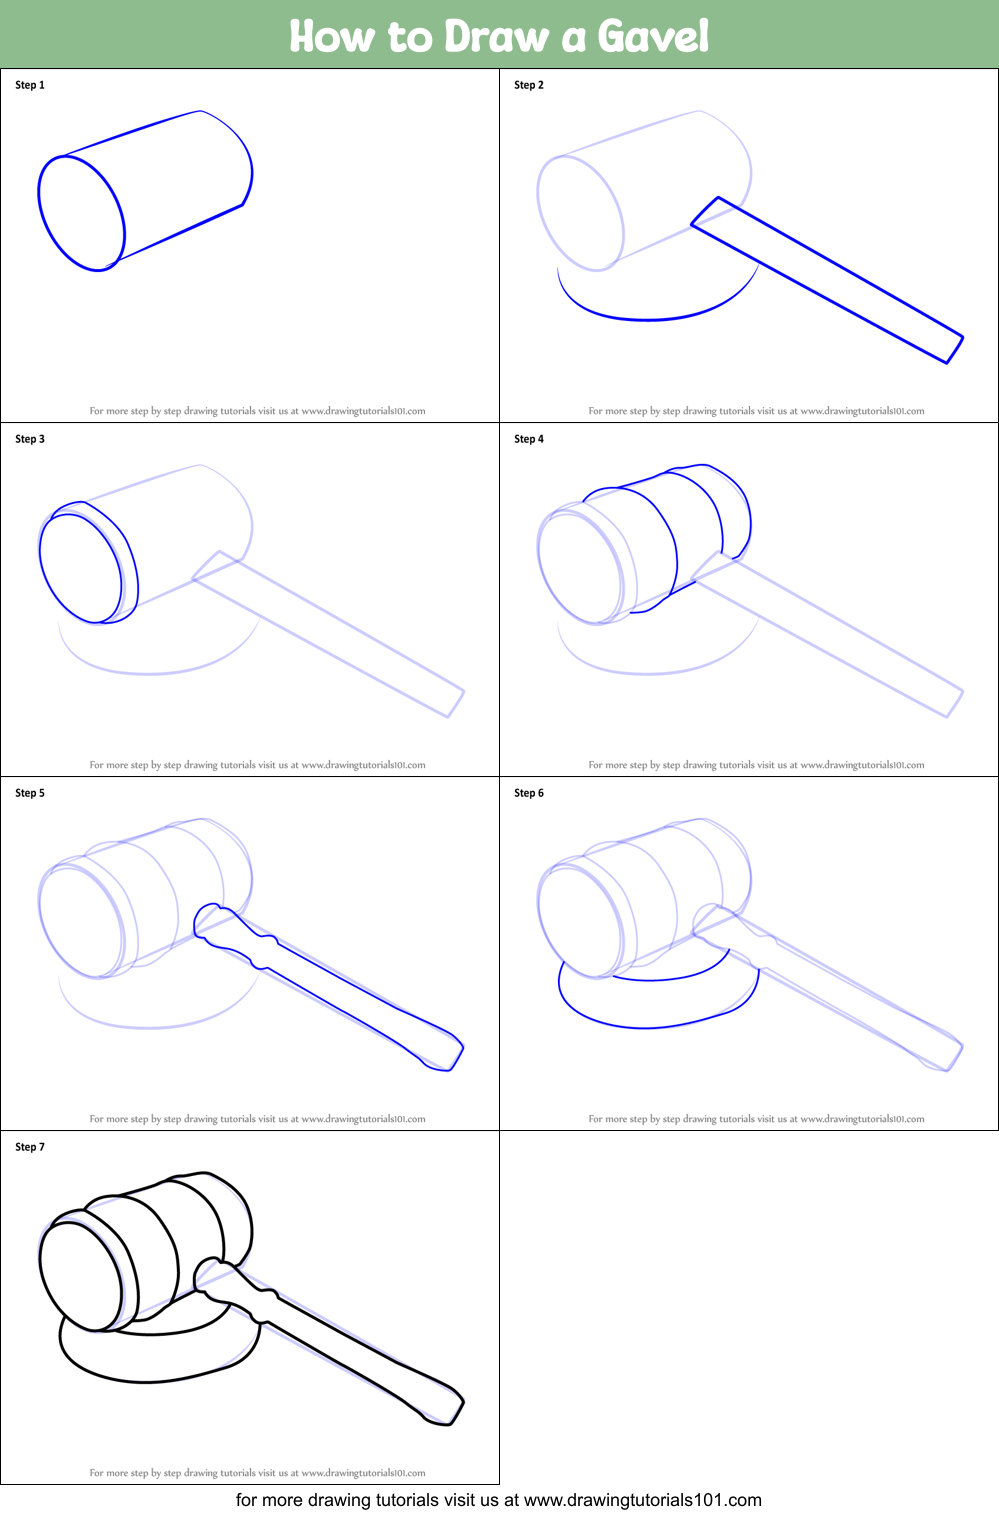 How to Draw a Gavel printable step by step drawing sheet